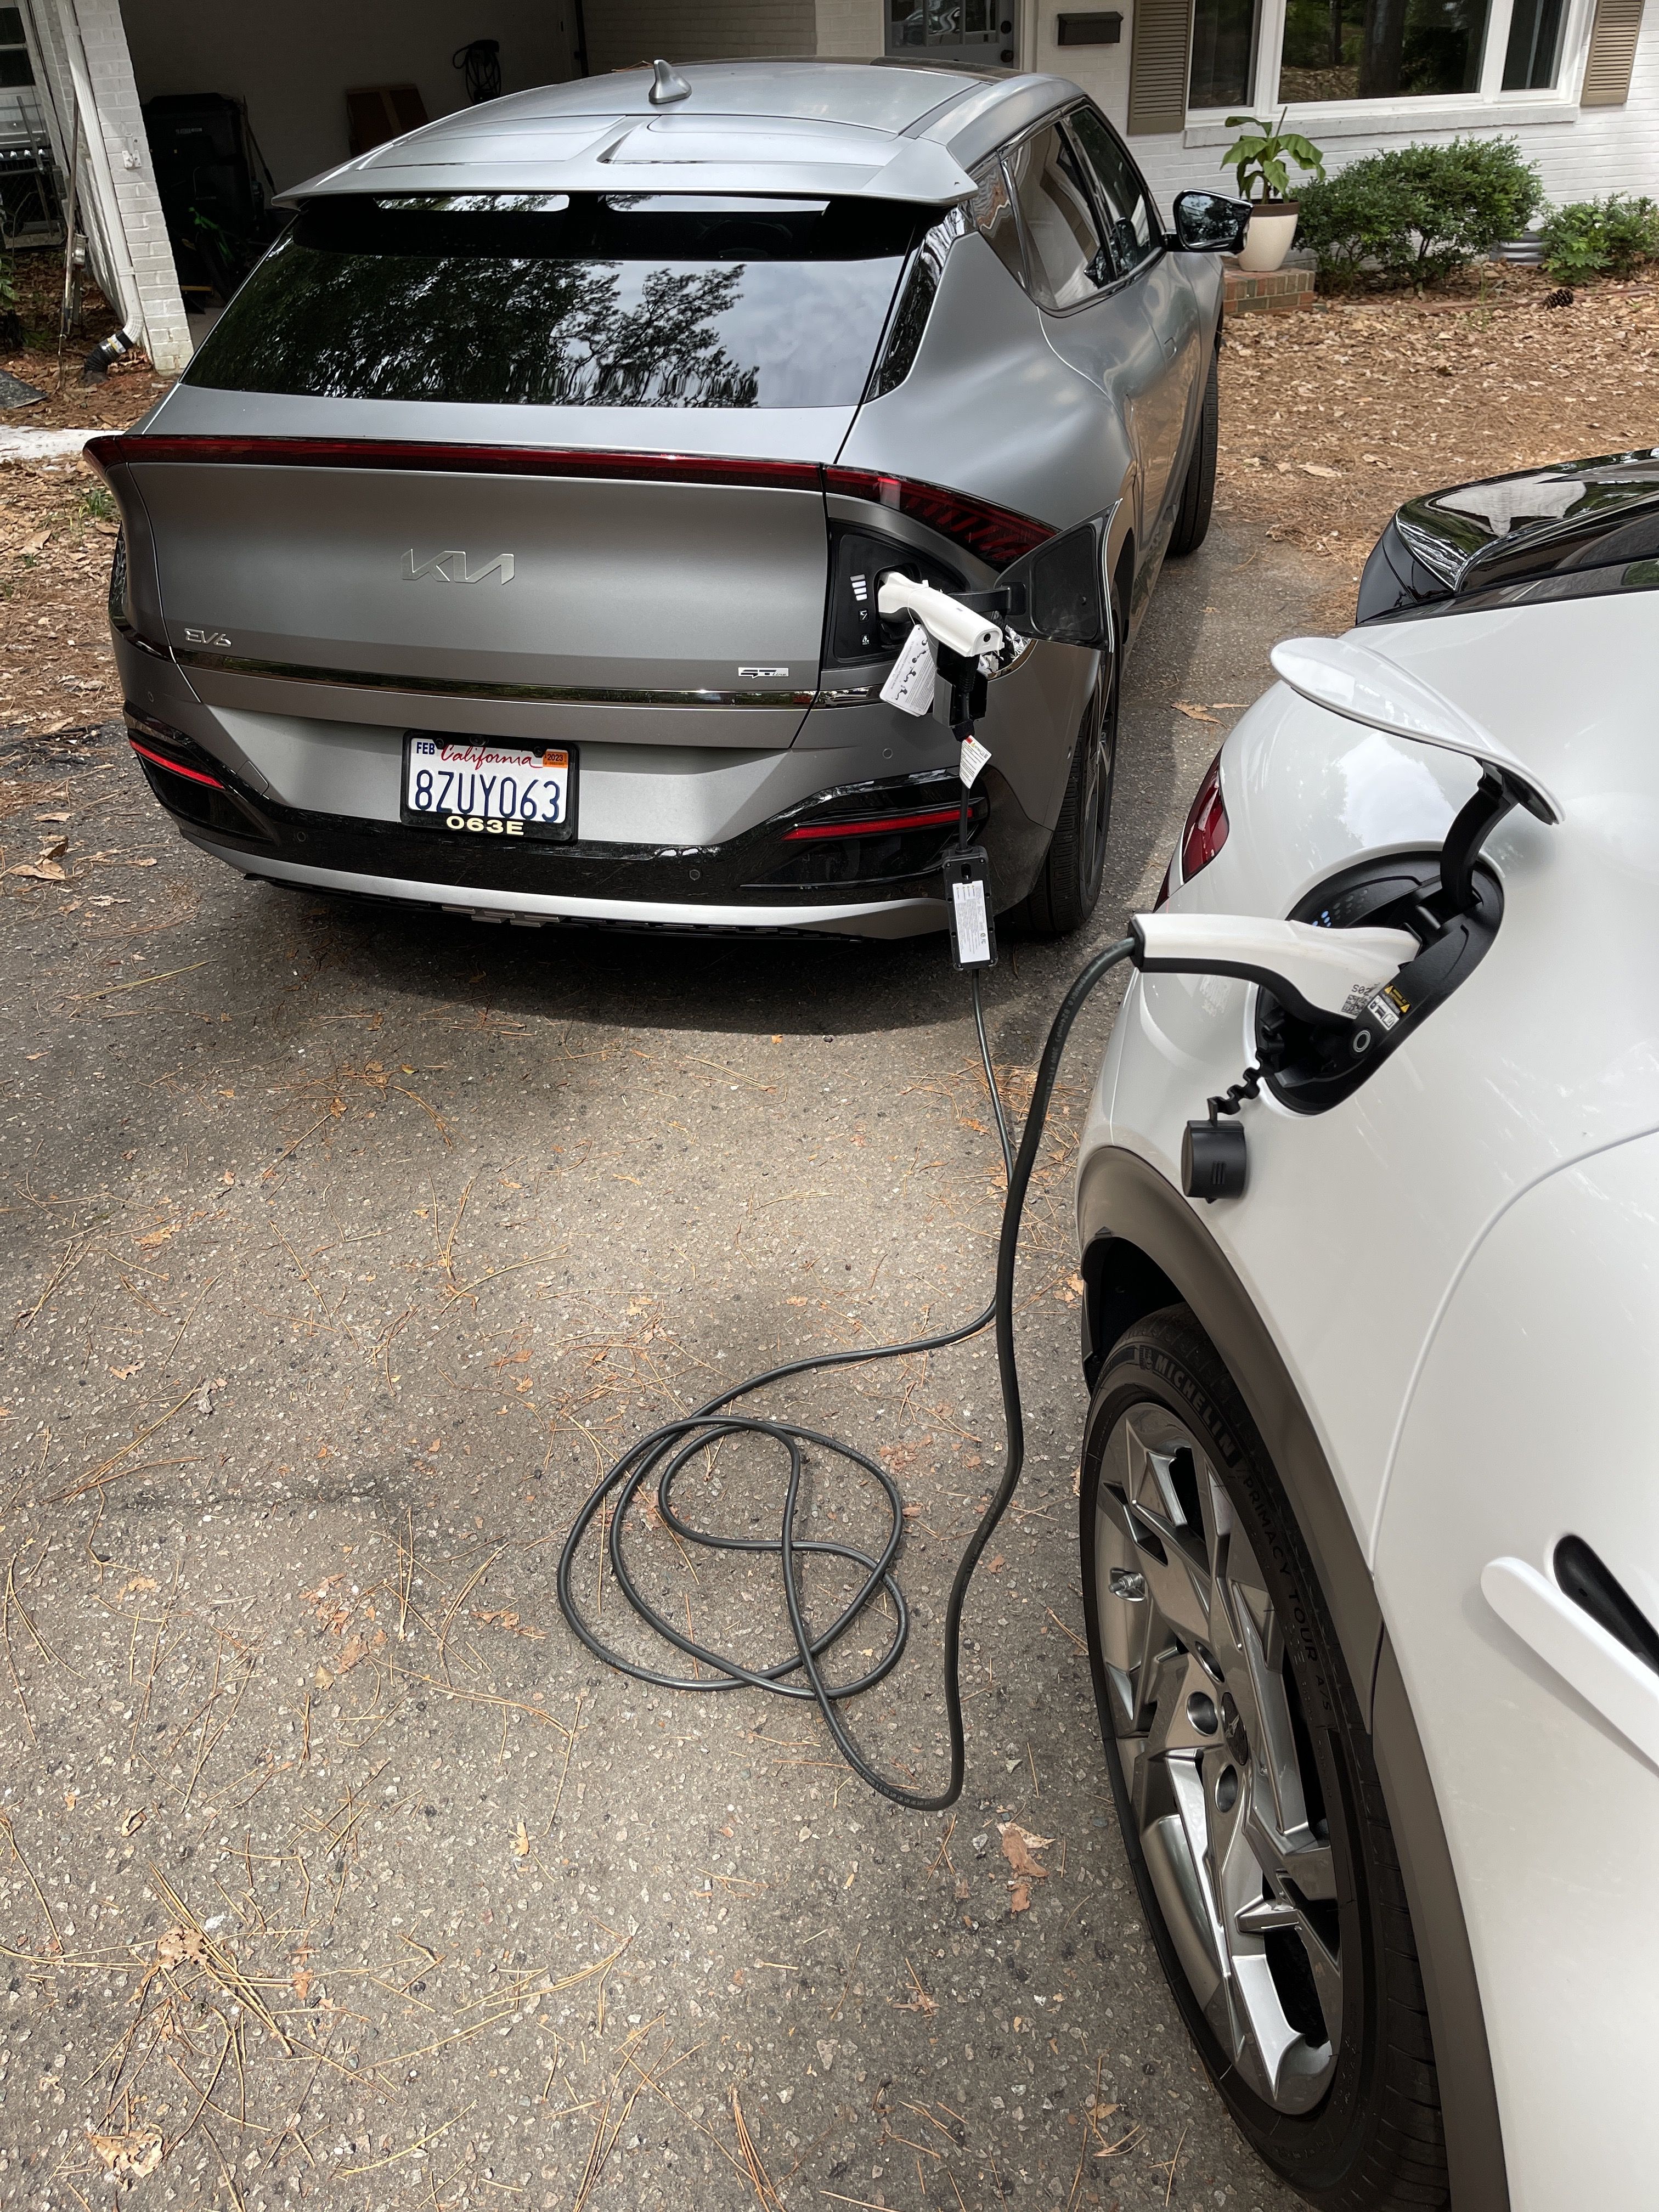 The Kia EV6 Can Charge Other Electric Cars